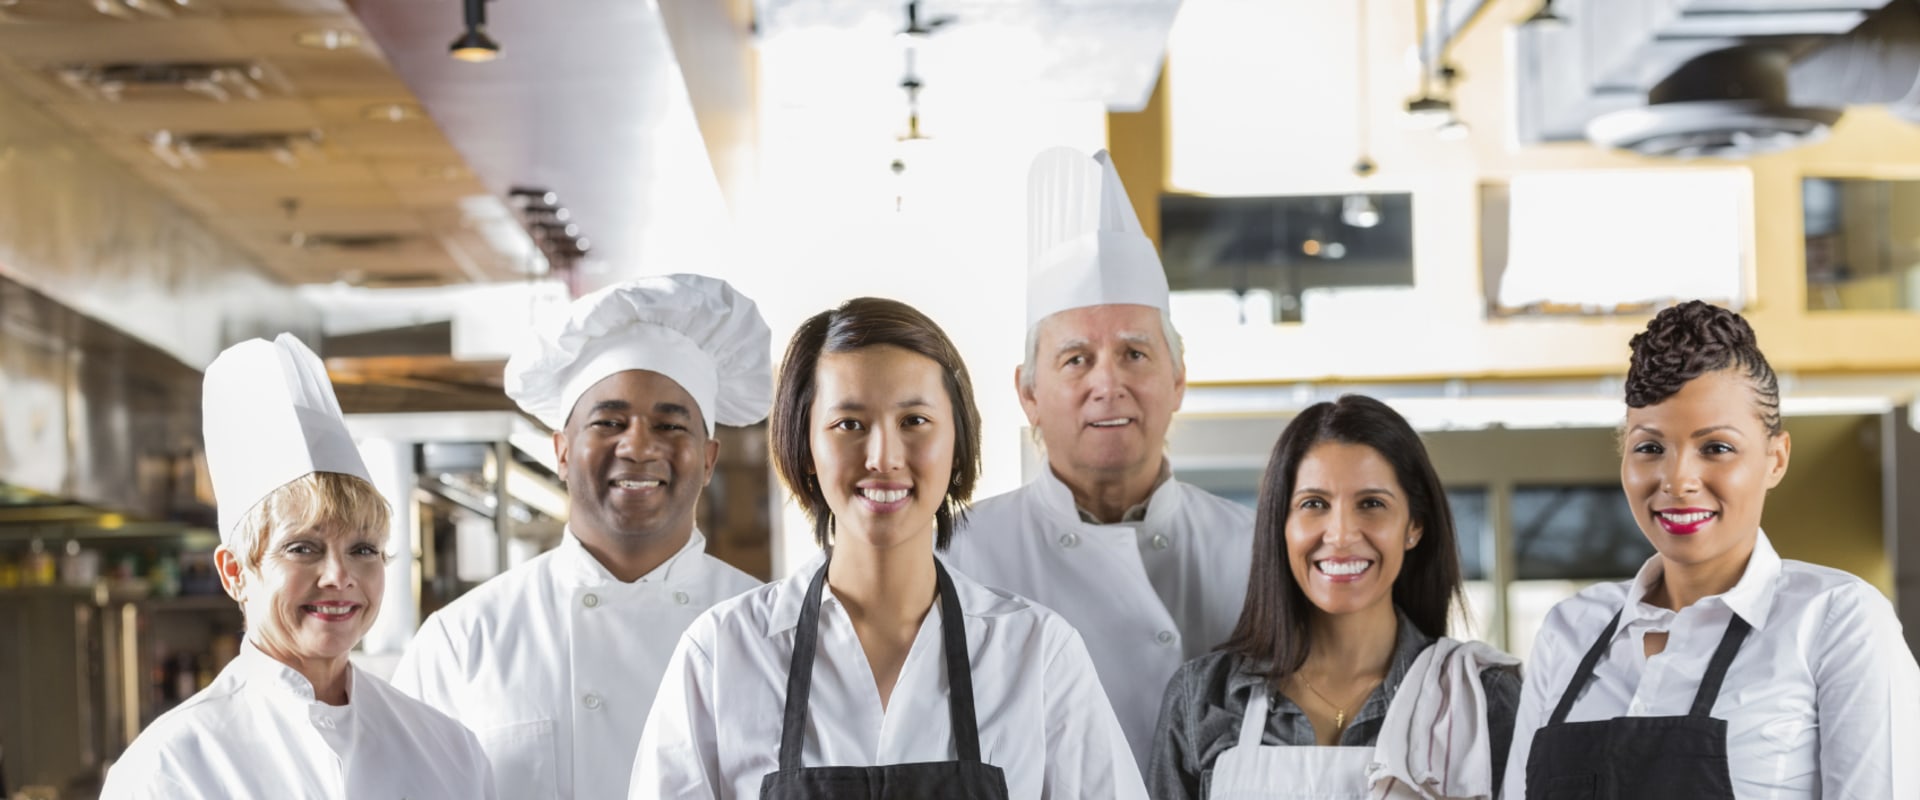 What are food skills for a job?